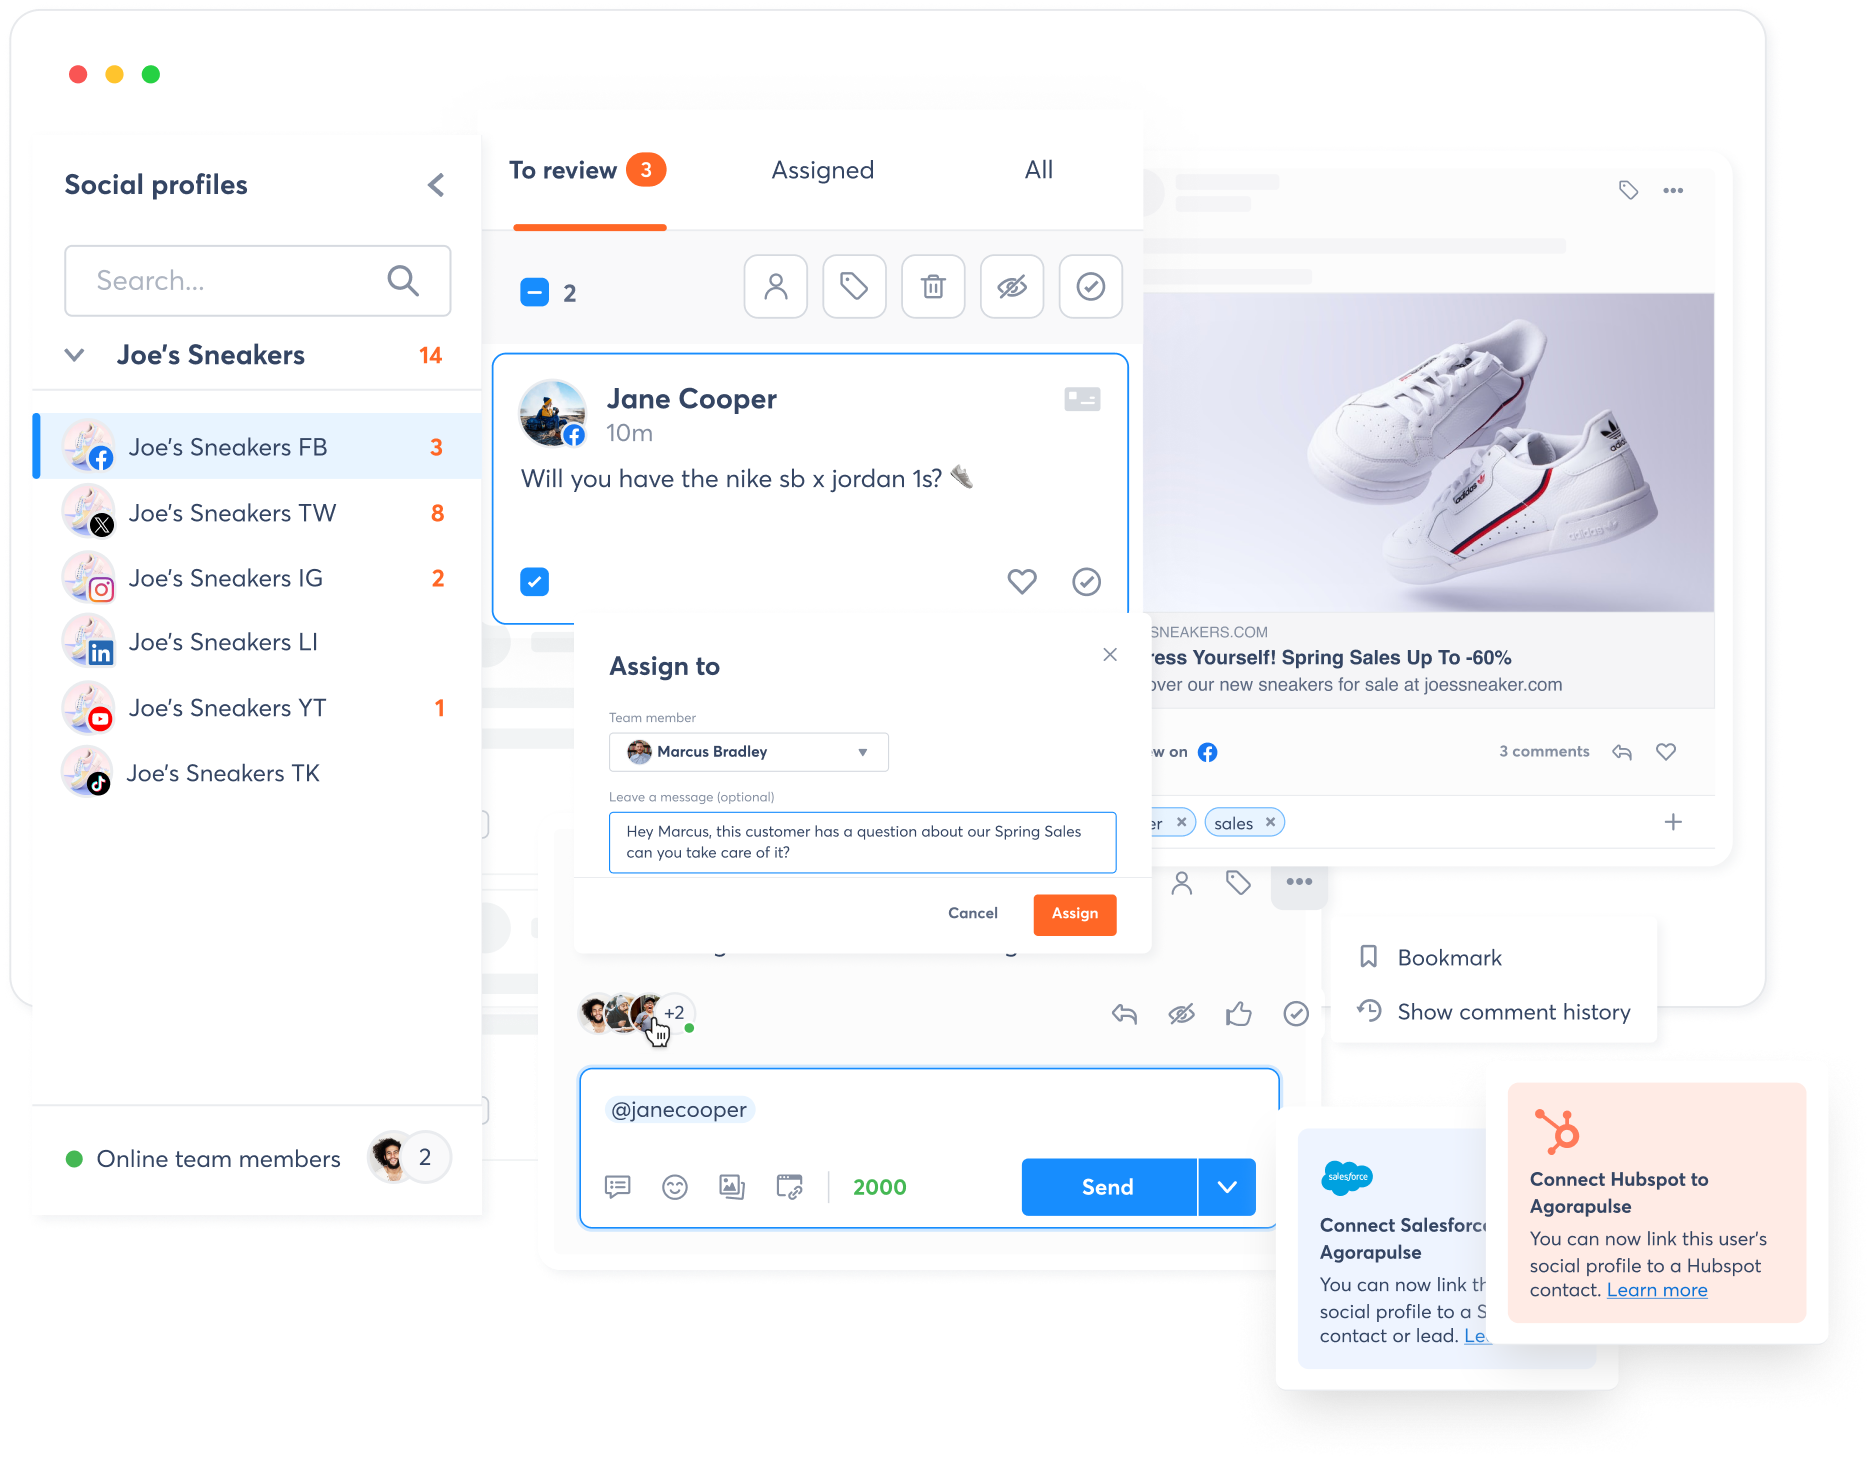 A view of how to find and manage conversations across all networks and profiles in Agorapulse